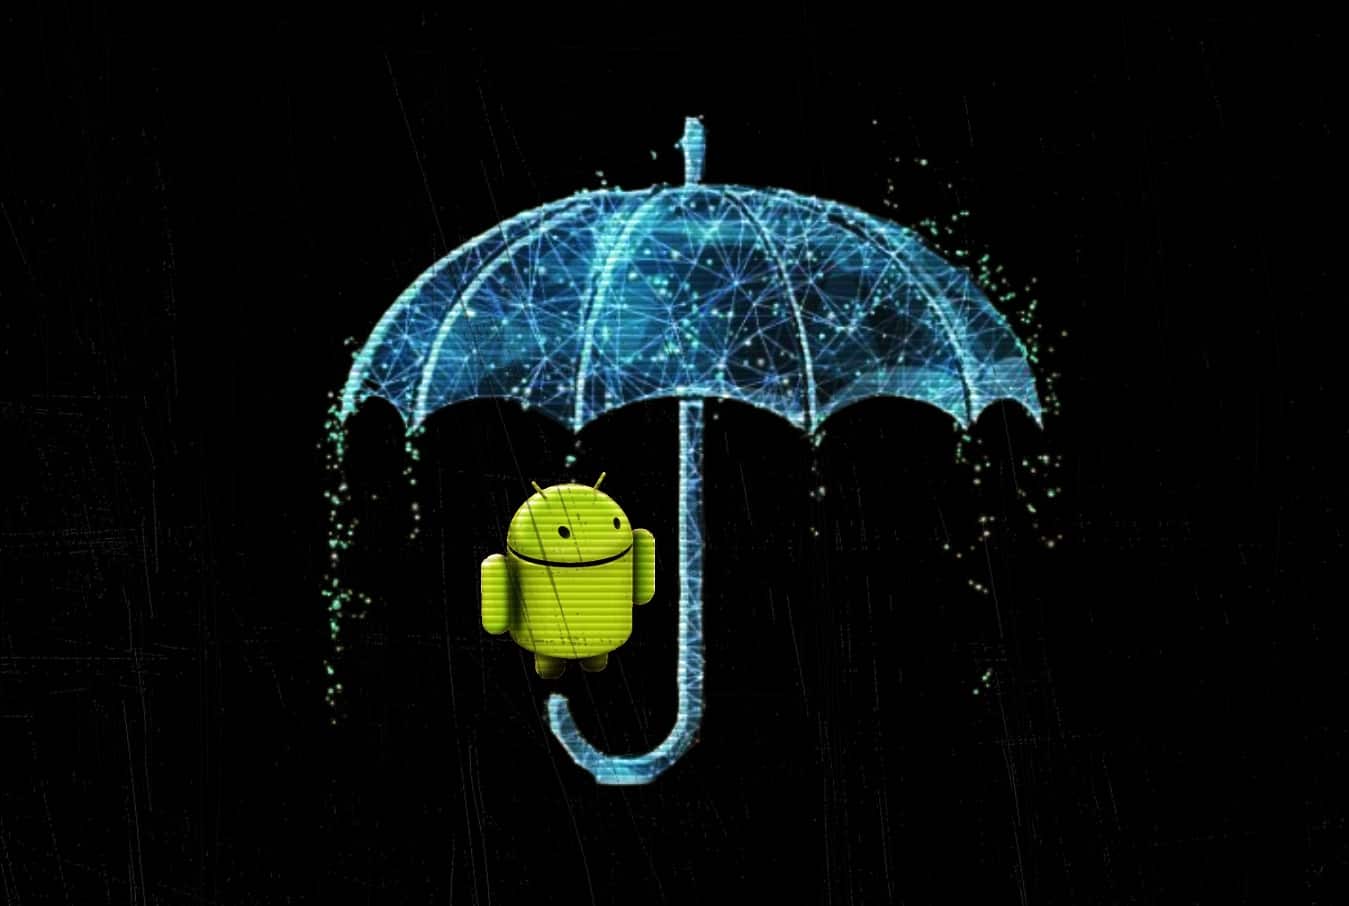 Android malware through Play Store - How to protect your devices?